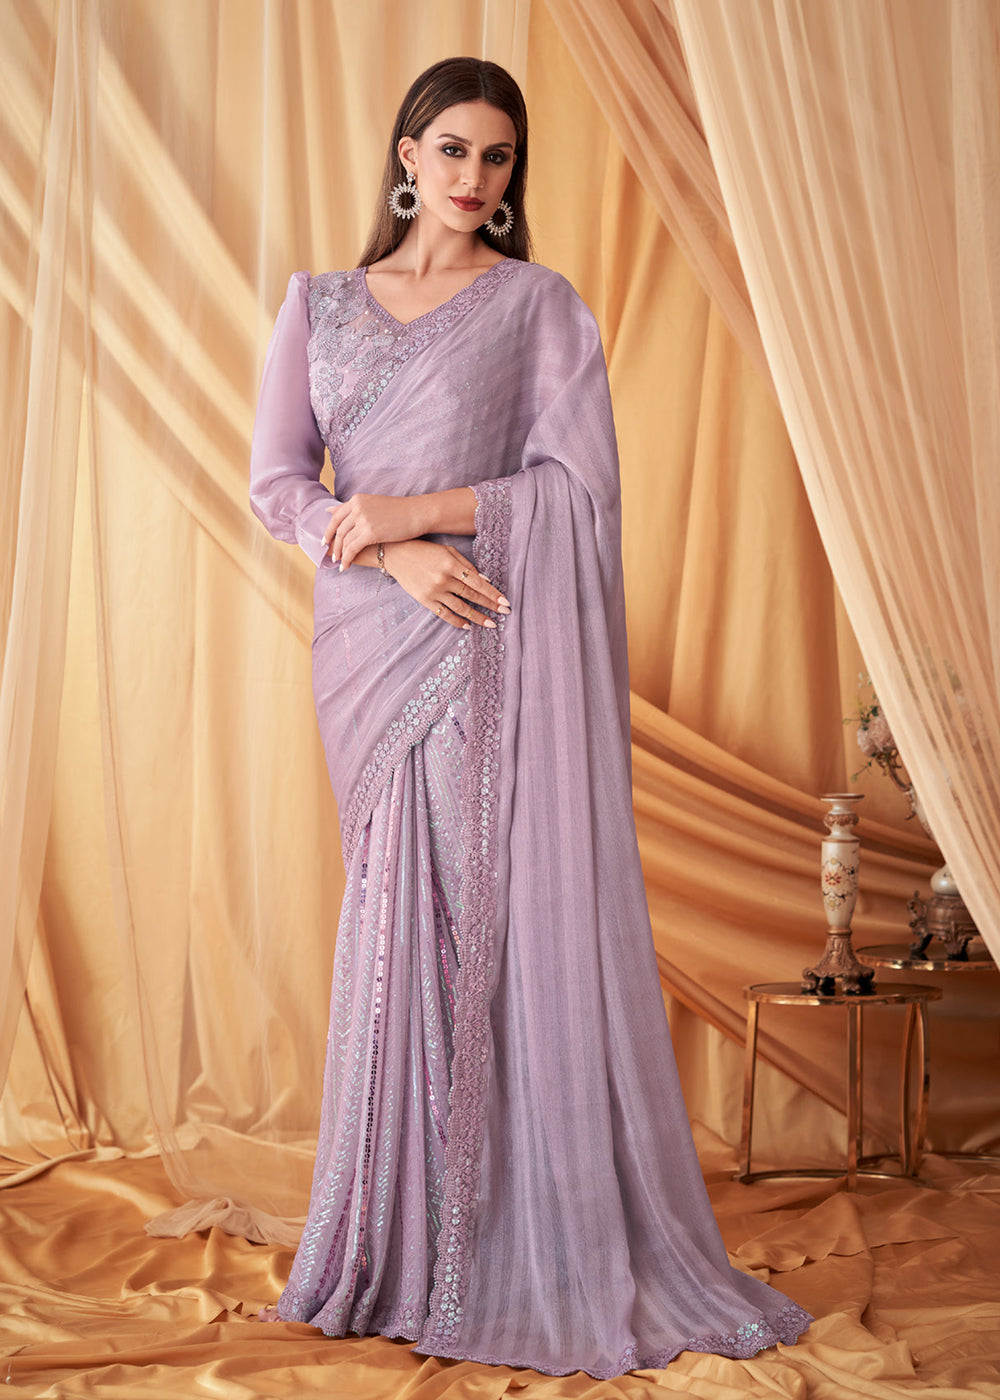 Buy Now Lavender Georgette Silk Embroidered Festive Party Saree Online in USA, UK, Canada & Worldwide at Empress Clothing.